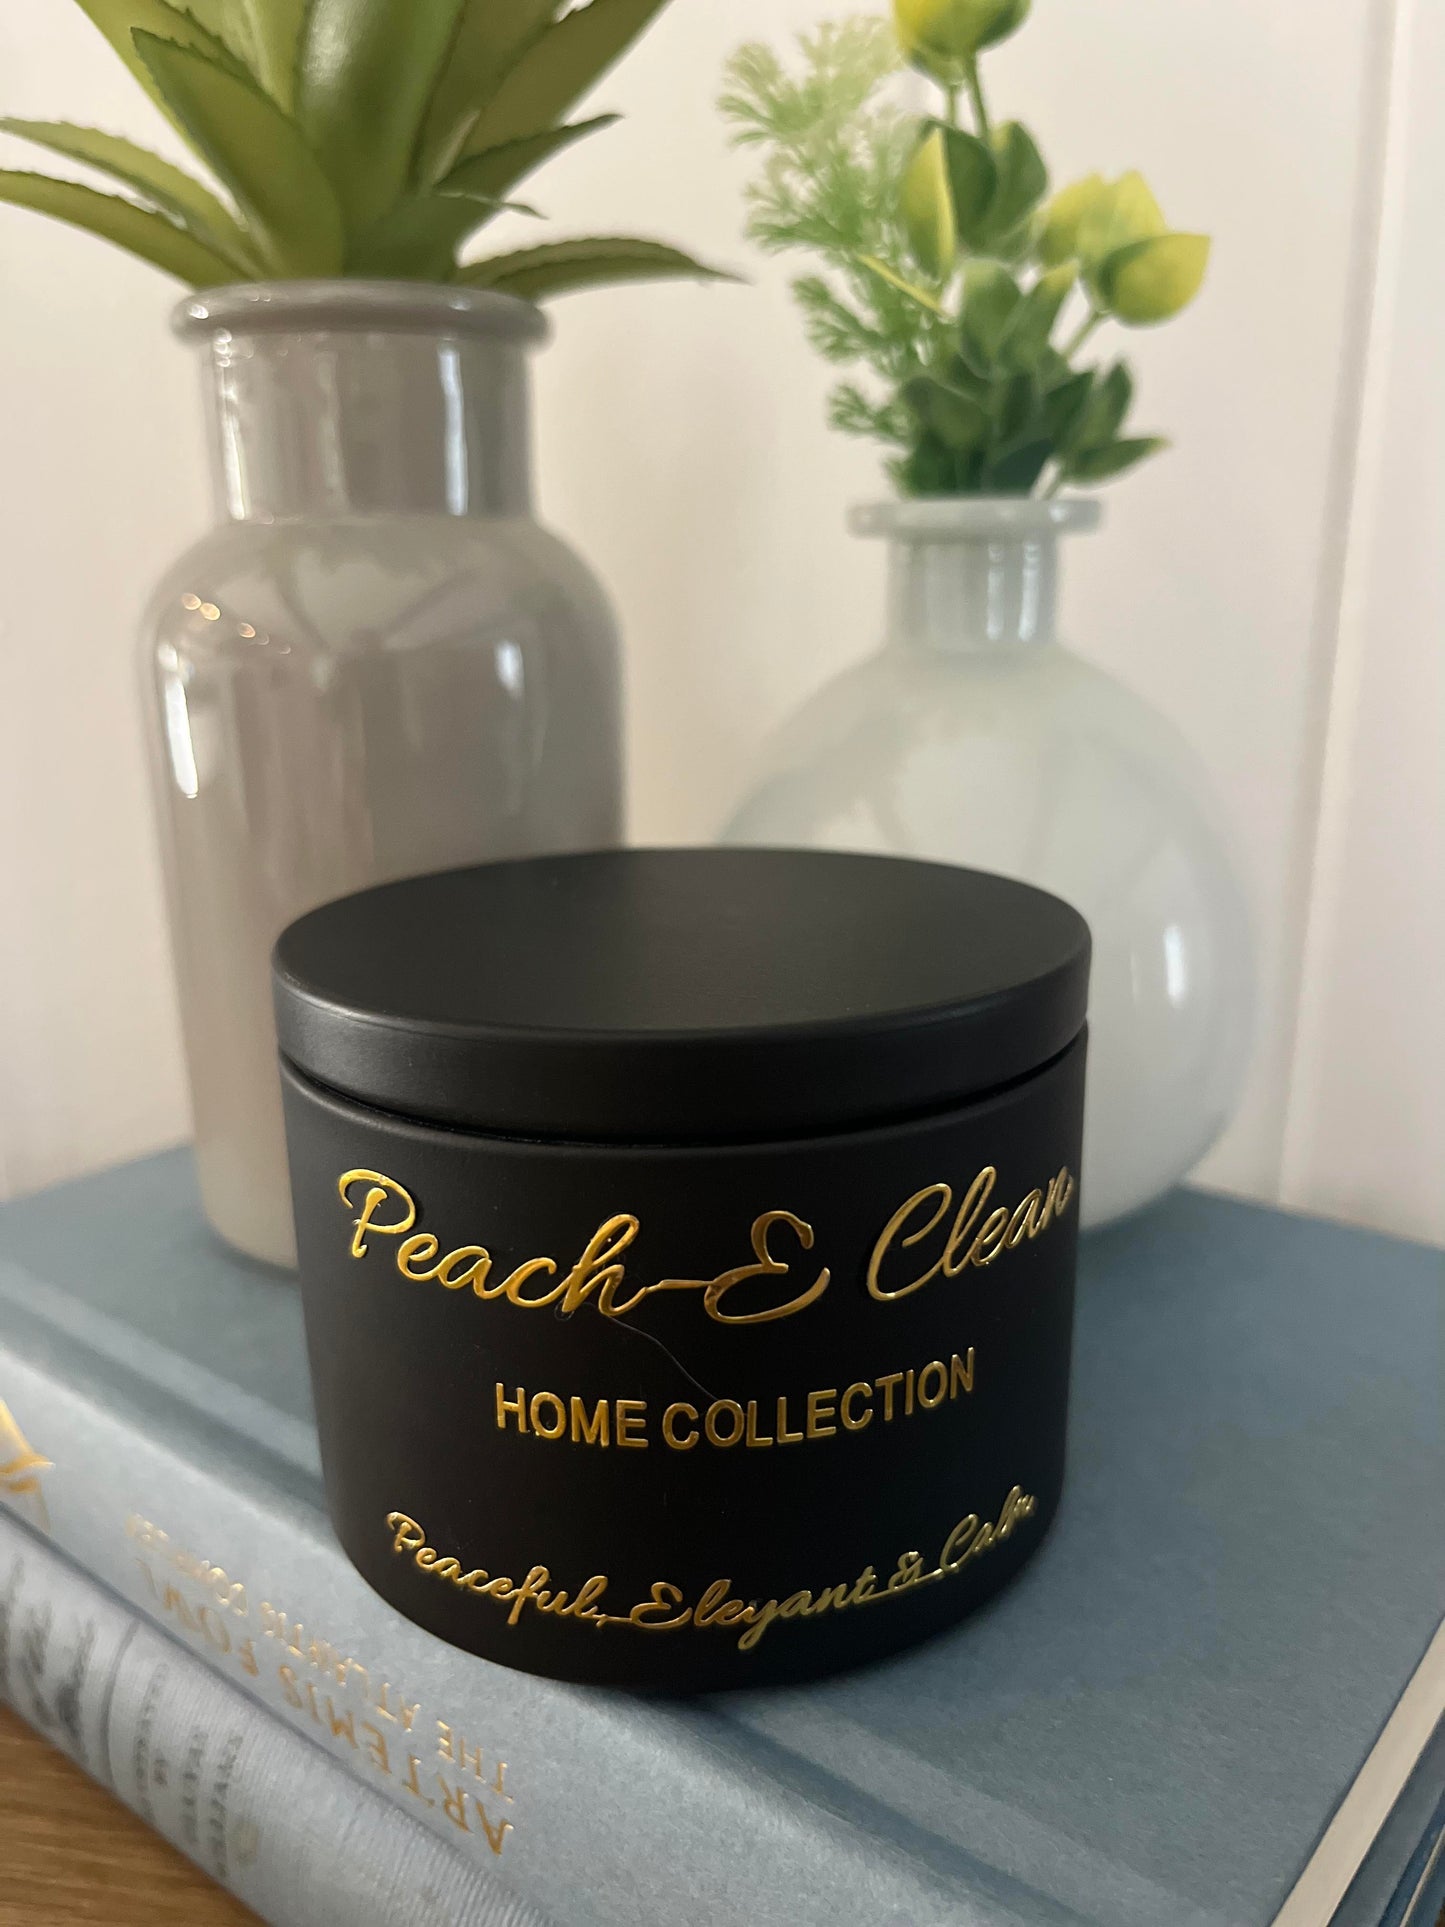 Peach-E Clean Home Collection Lavender Leaves™ Organic Candle